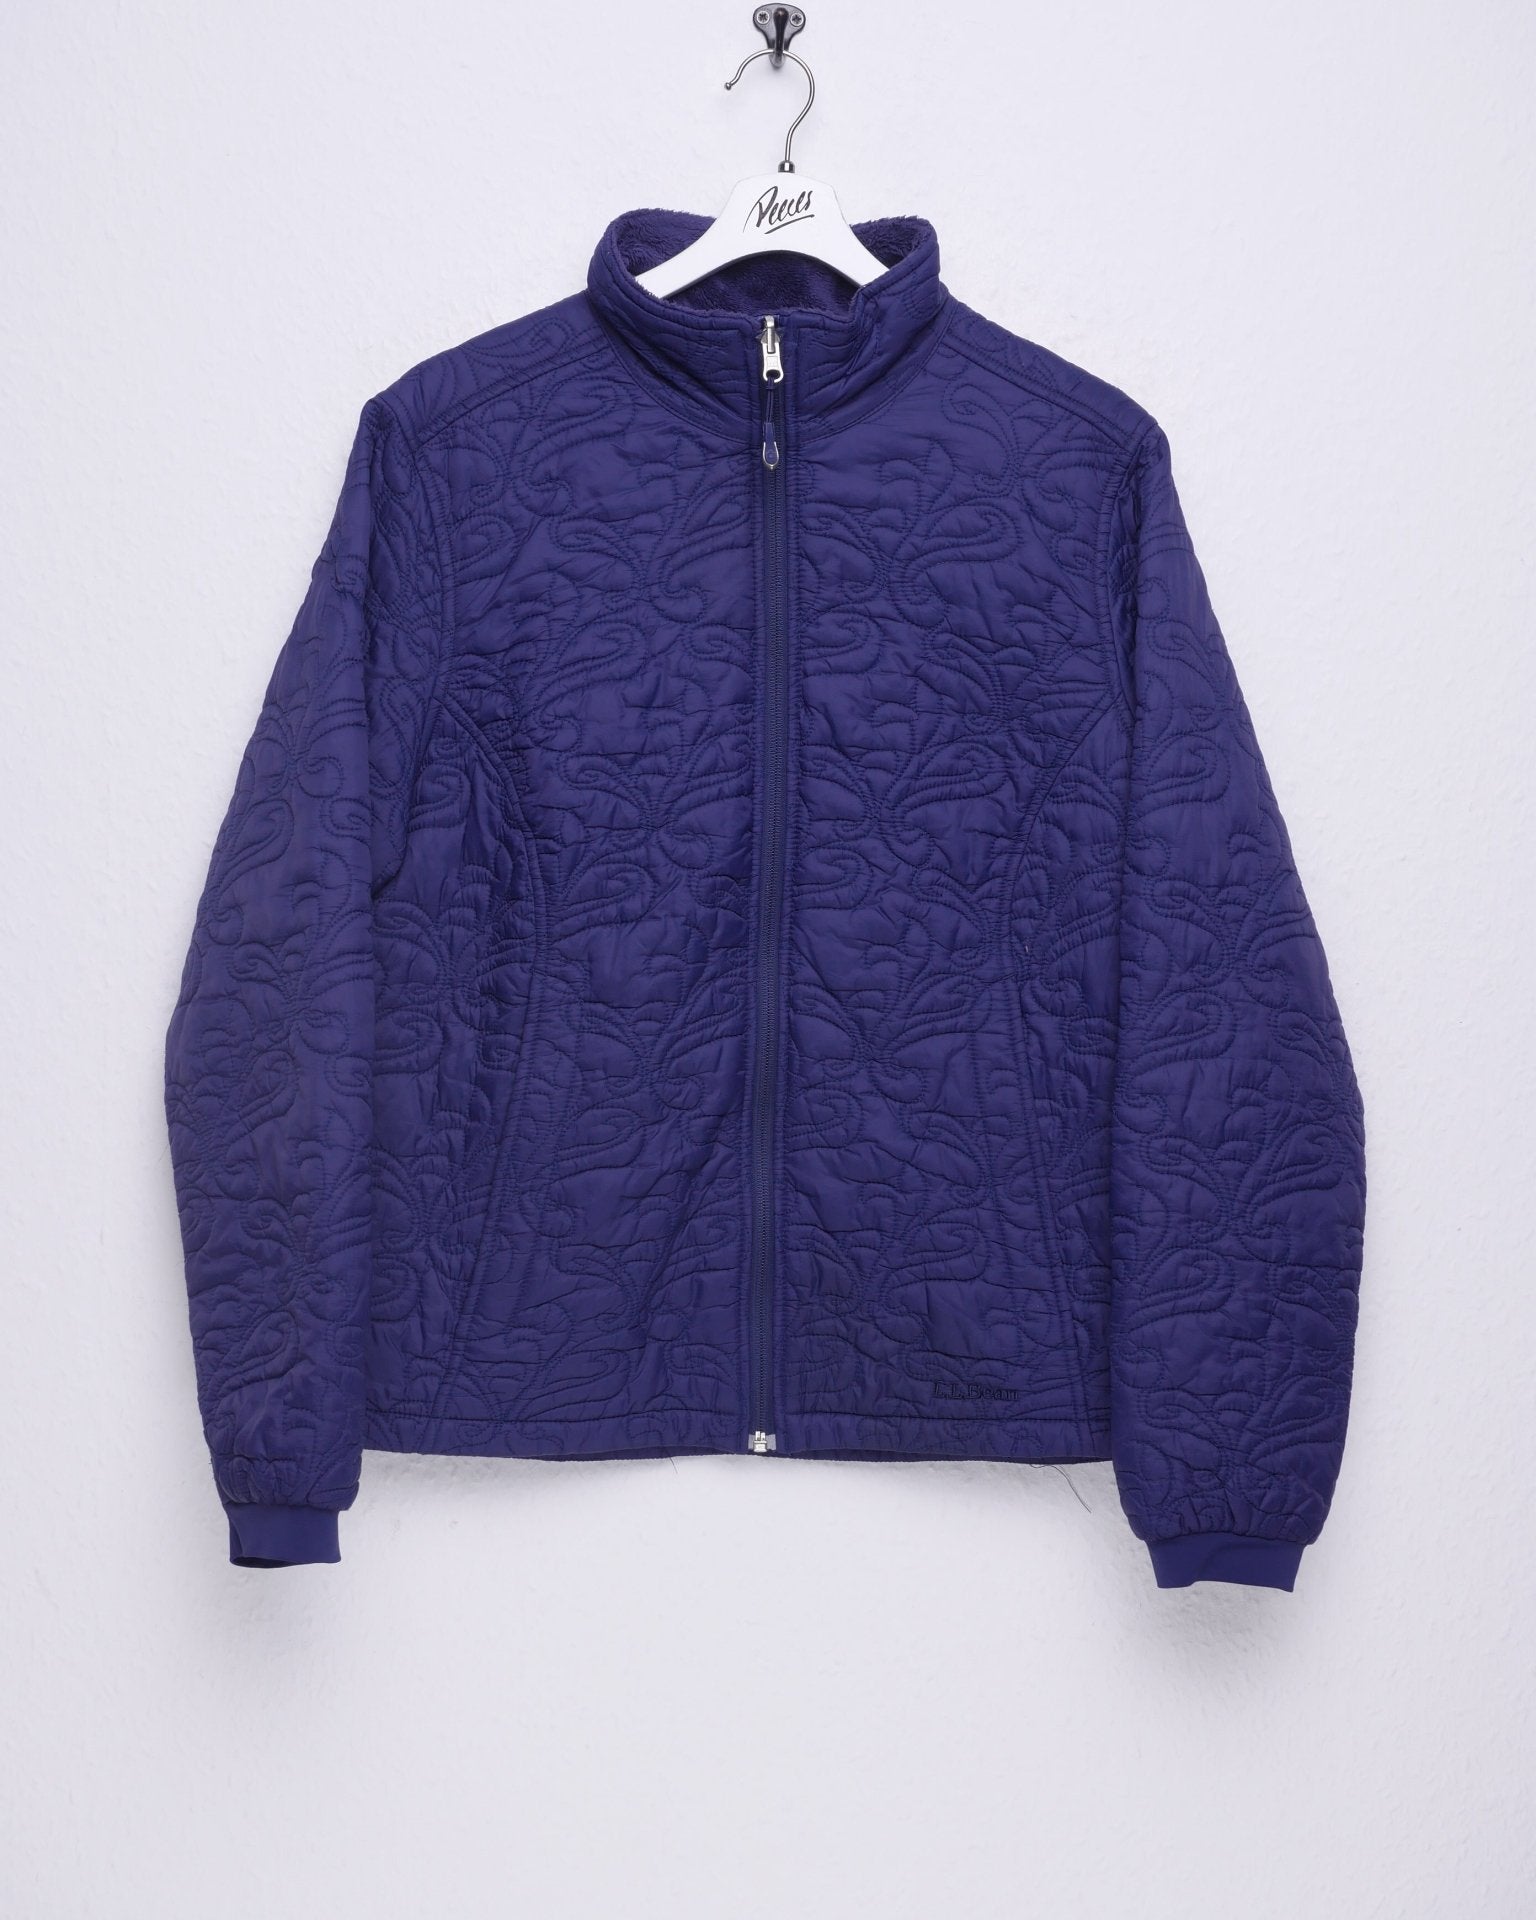 LL Bean embroidered Logo navy patterned light Jacke - Peeces